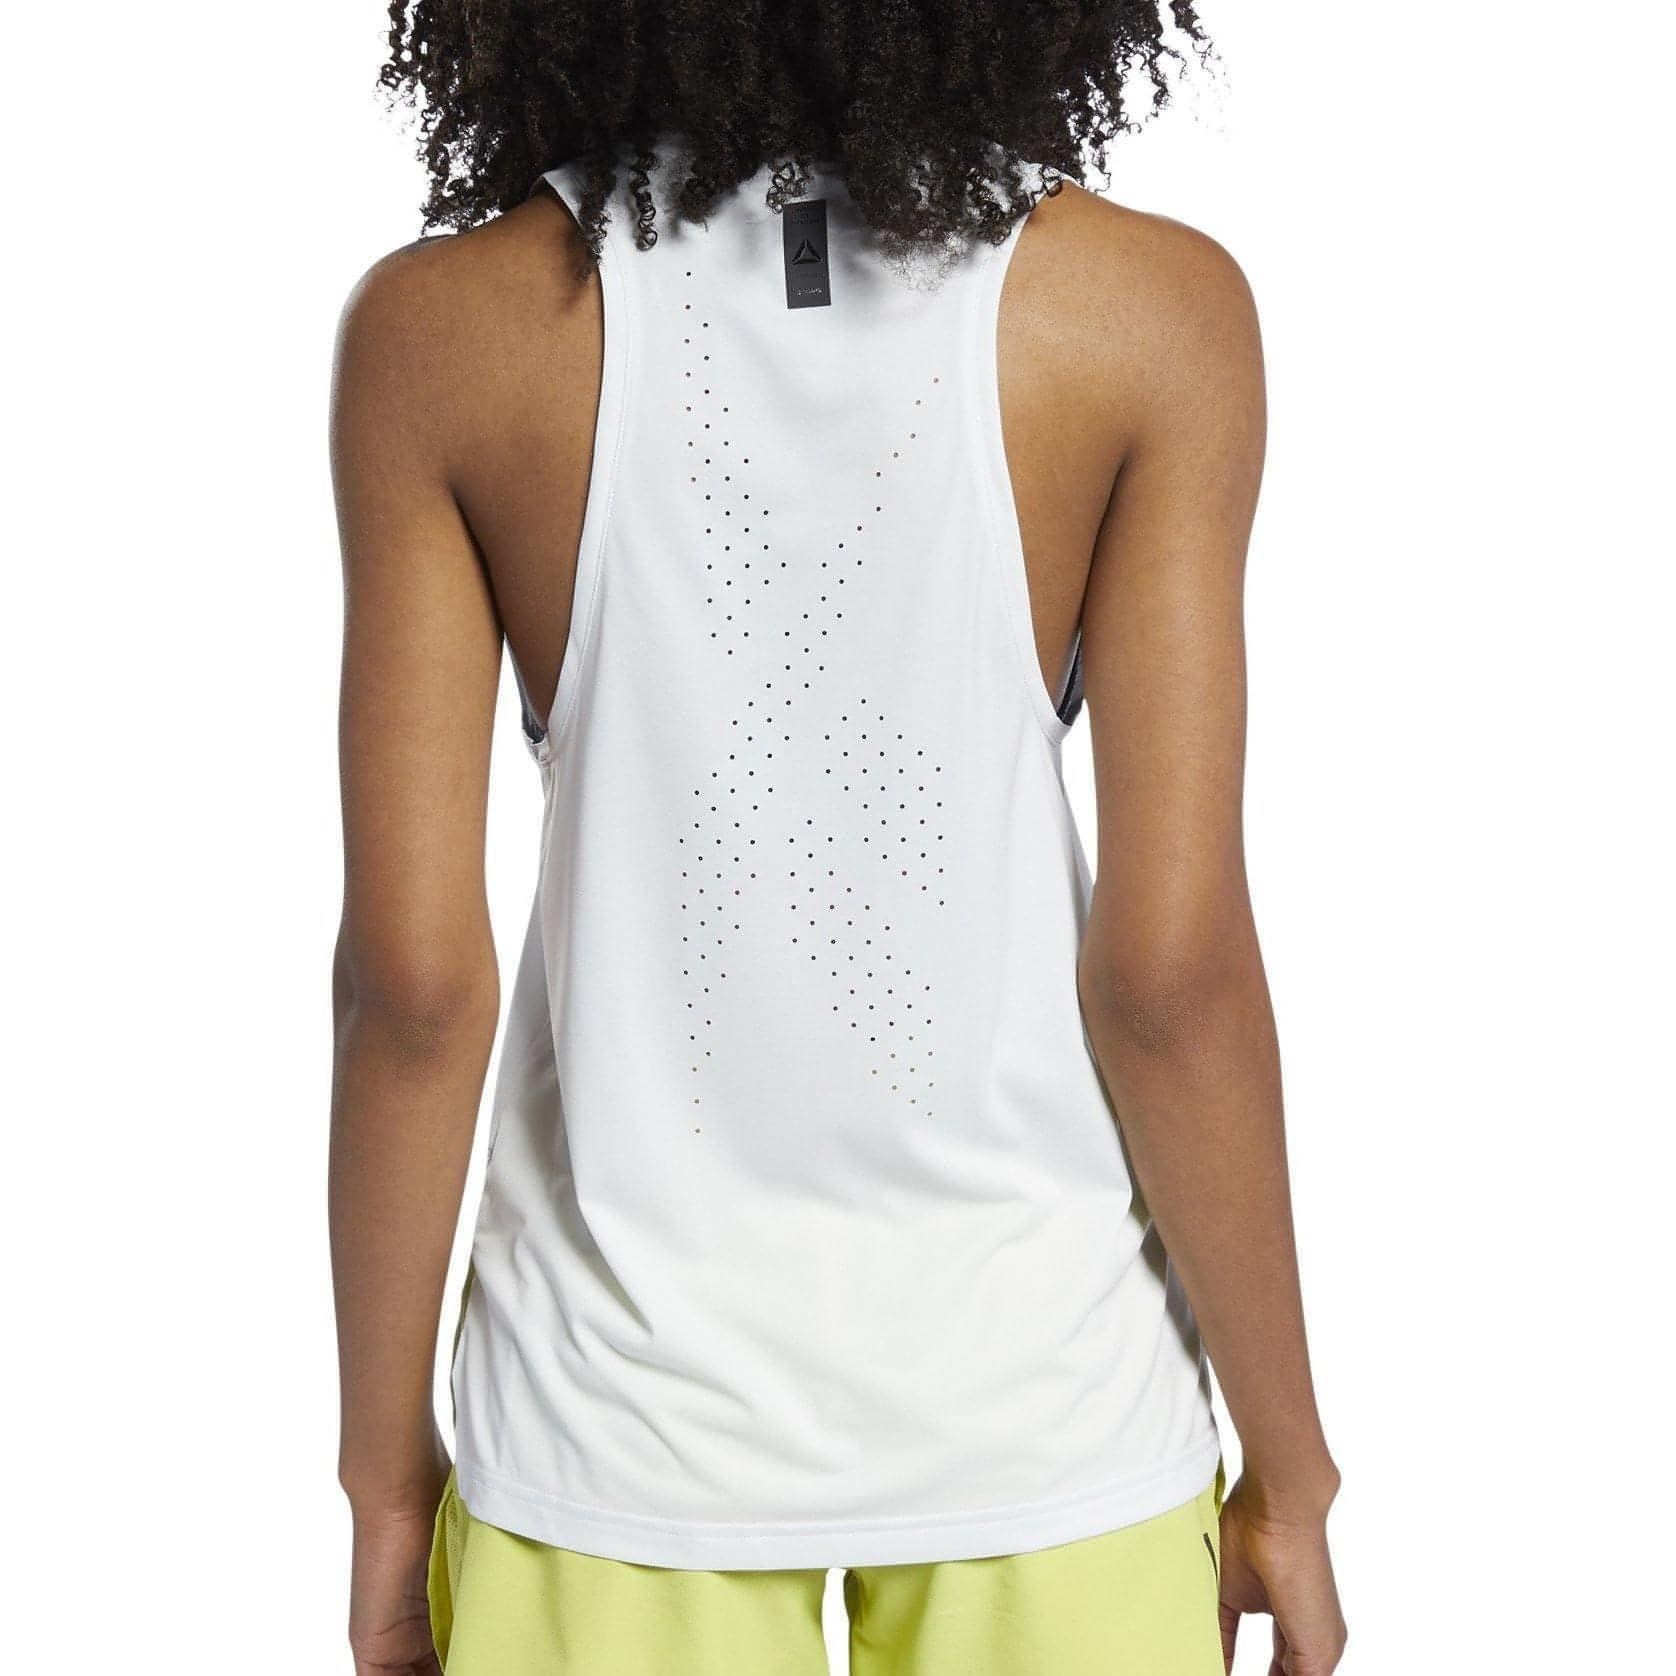 Reebok United By Fitness Perforated Womens Training Vest Tank Top - White - Start Fitness